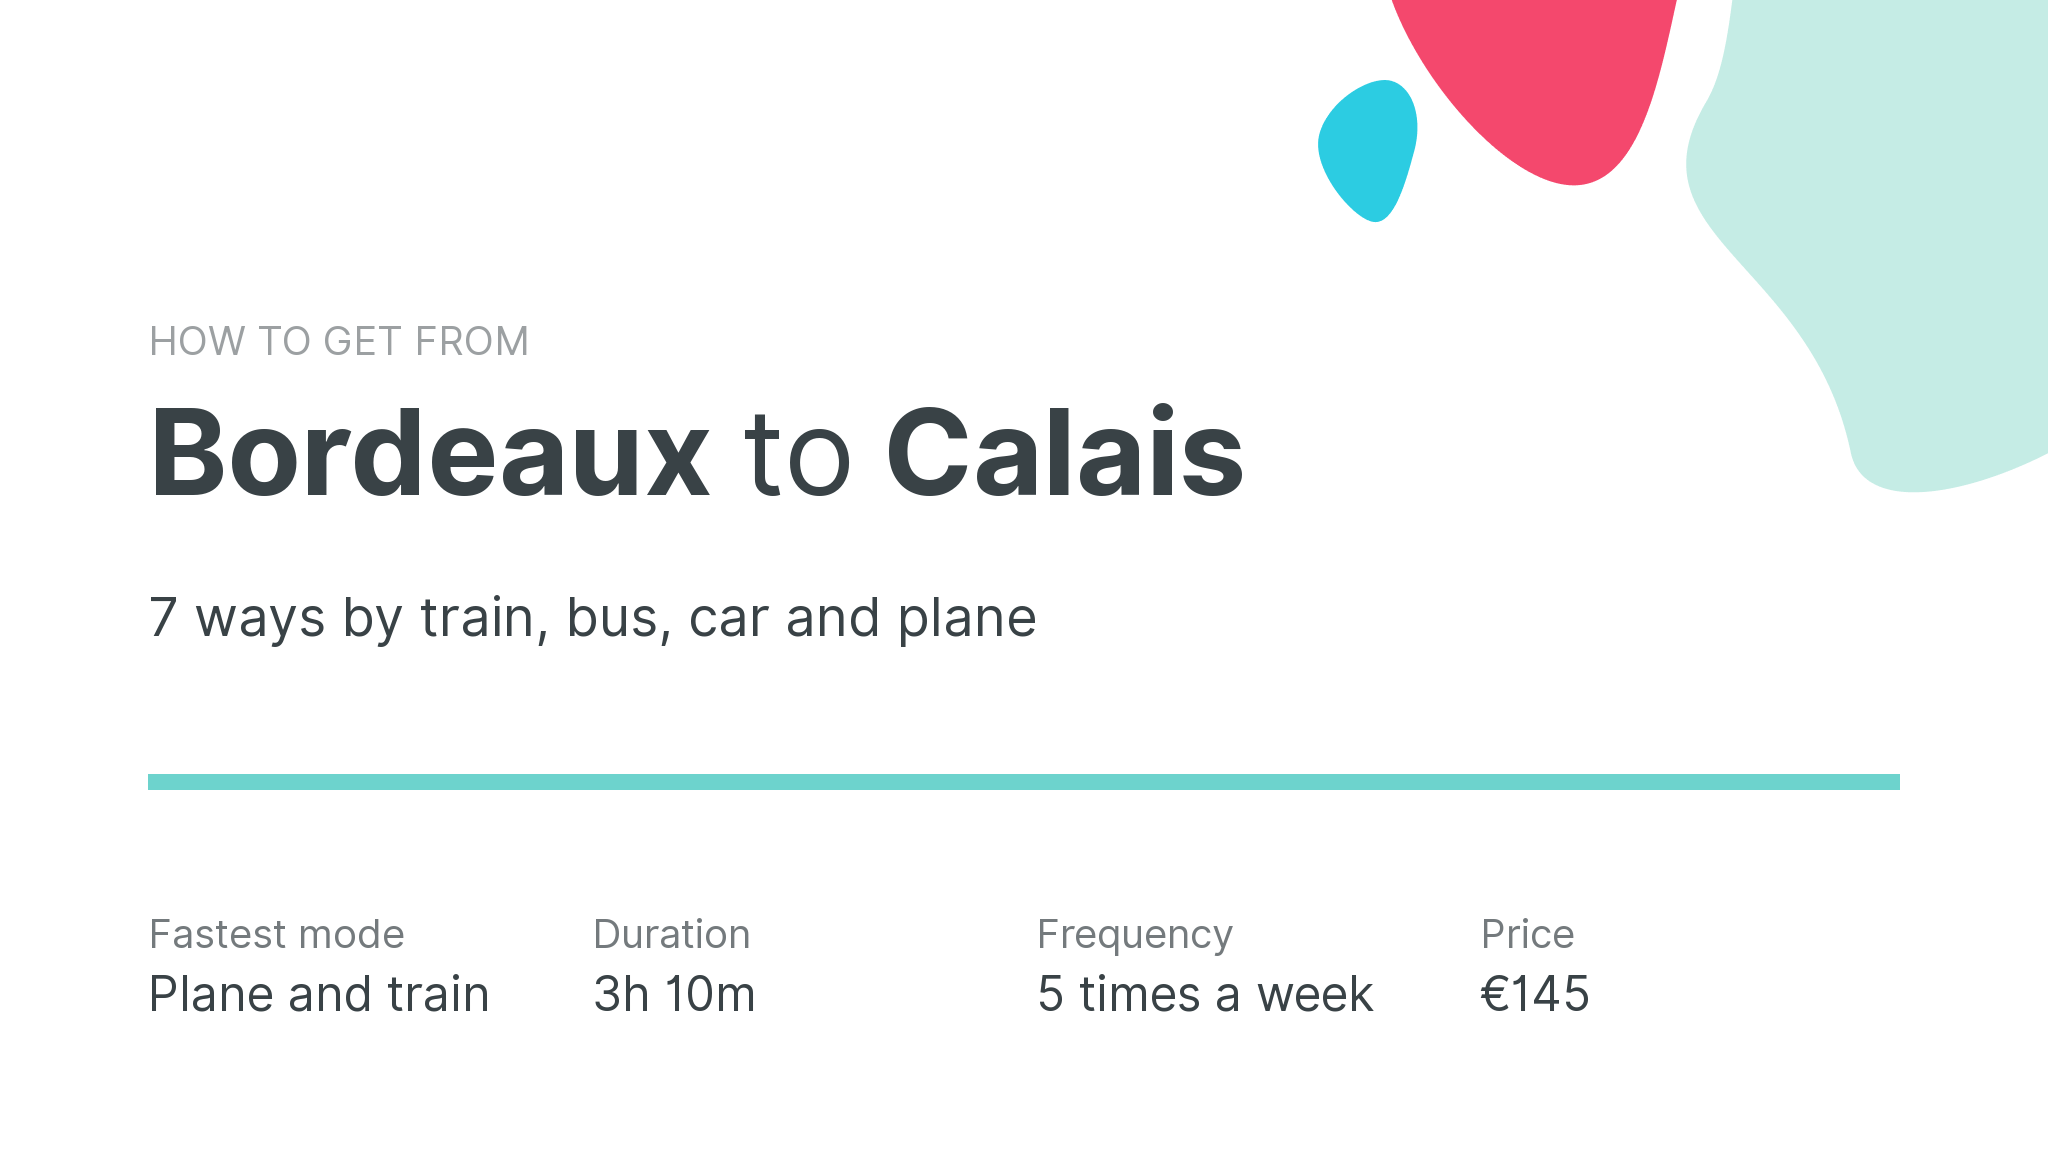 How do I get from Bordeaux to Calais